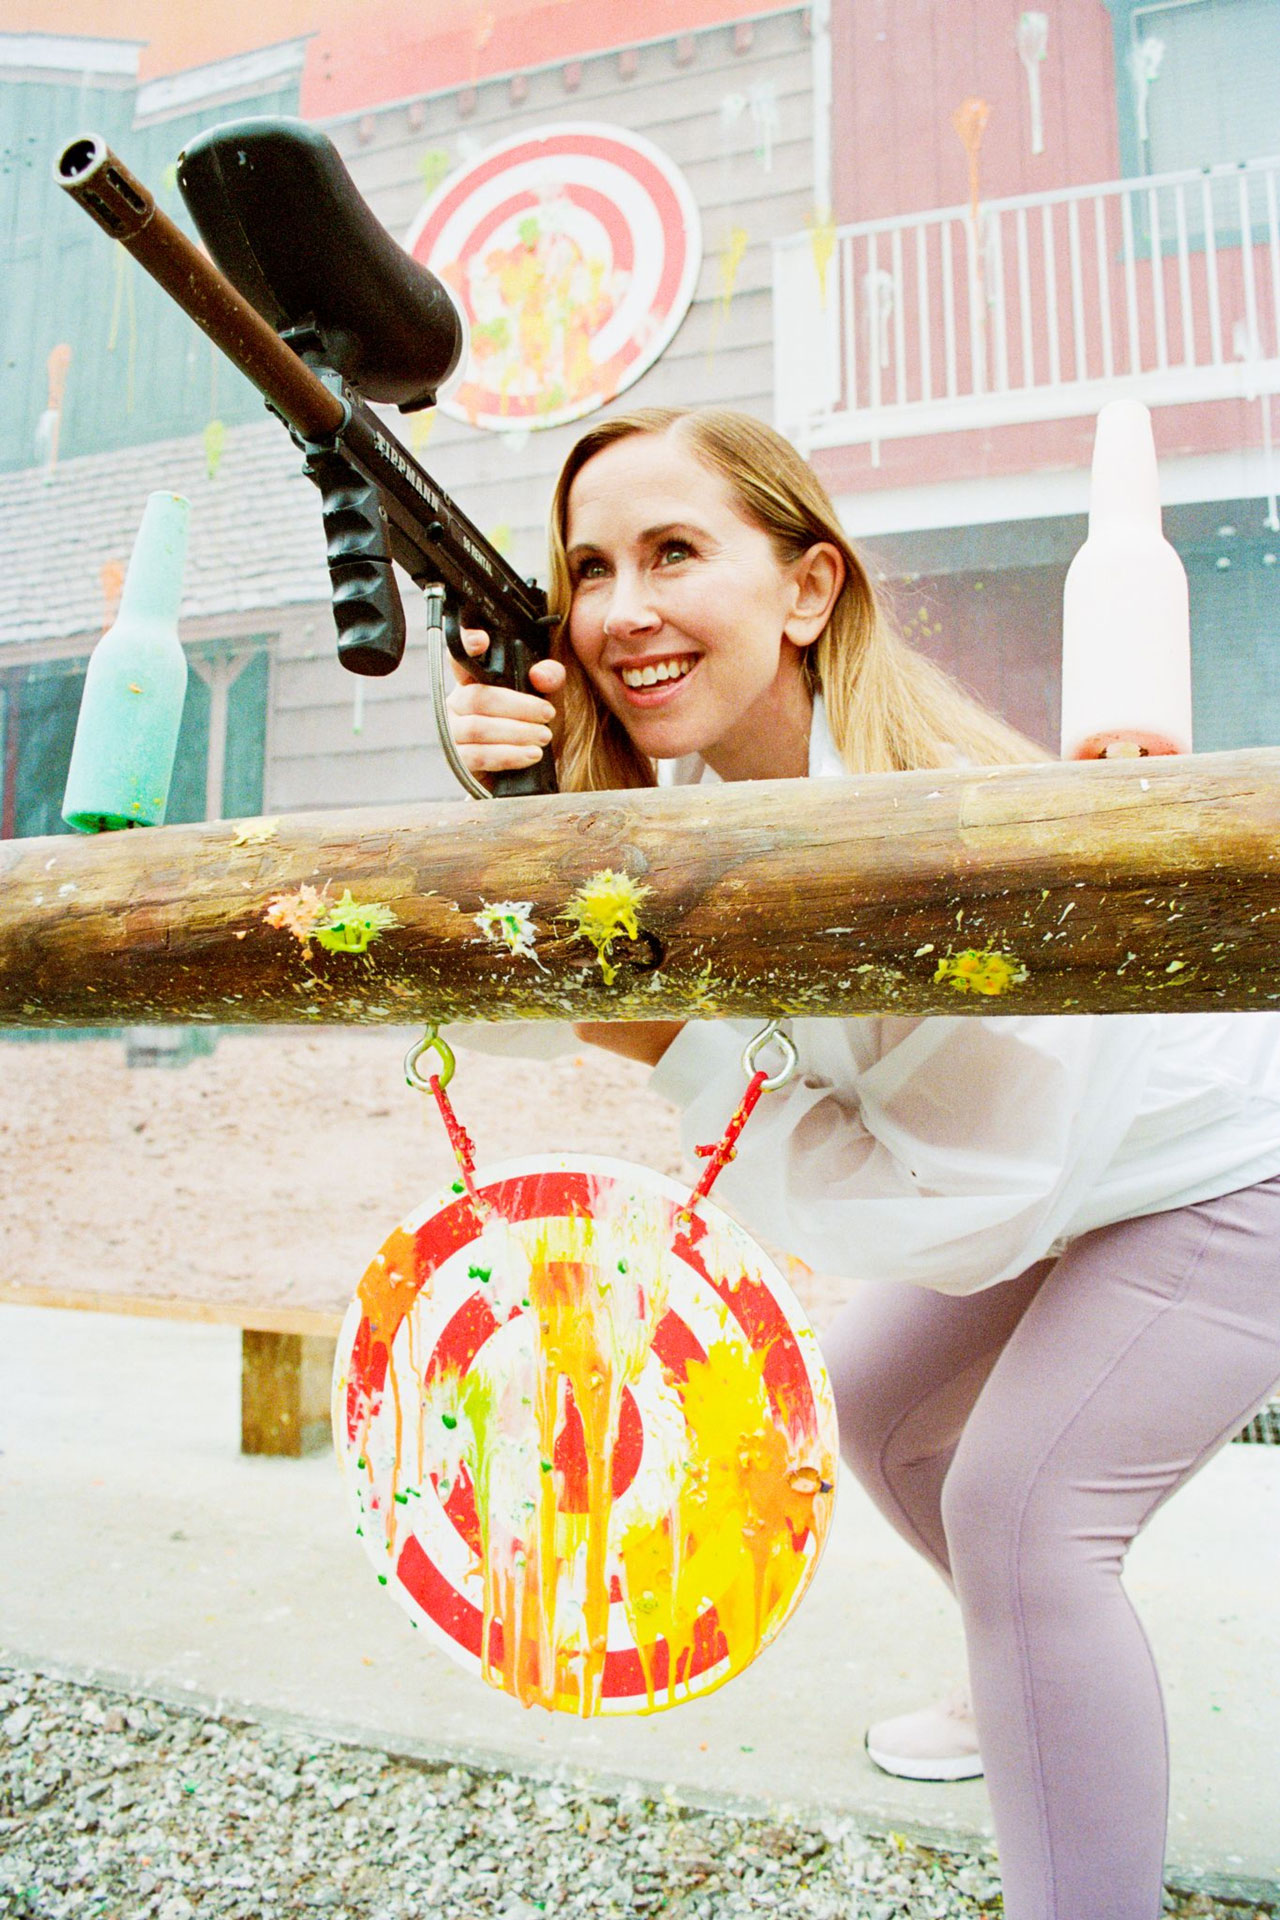 Click here to open the gallery overlay for the image: a woman smiling while playing paintball